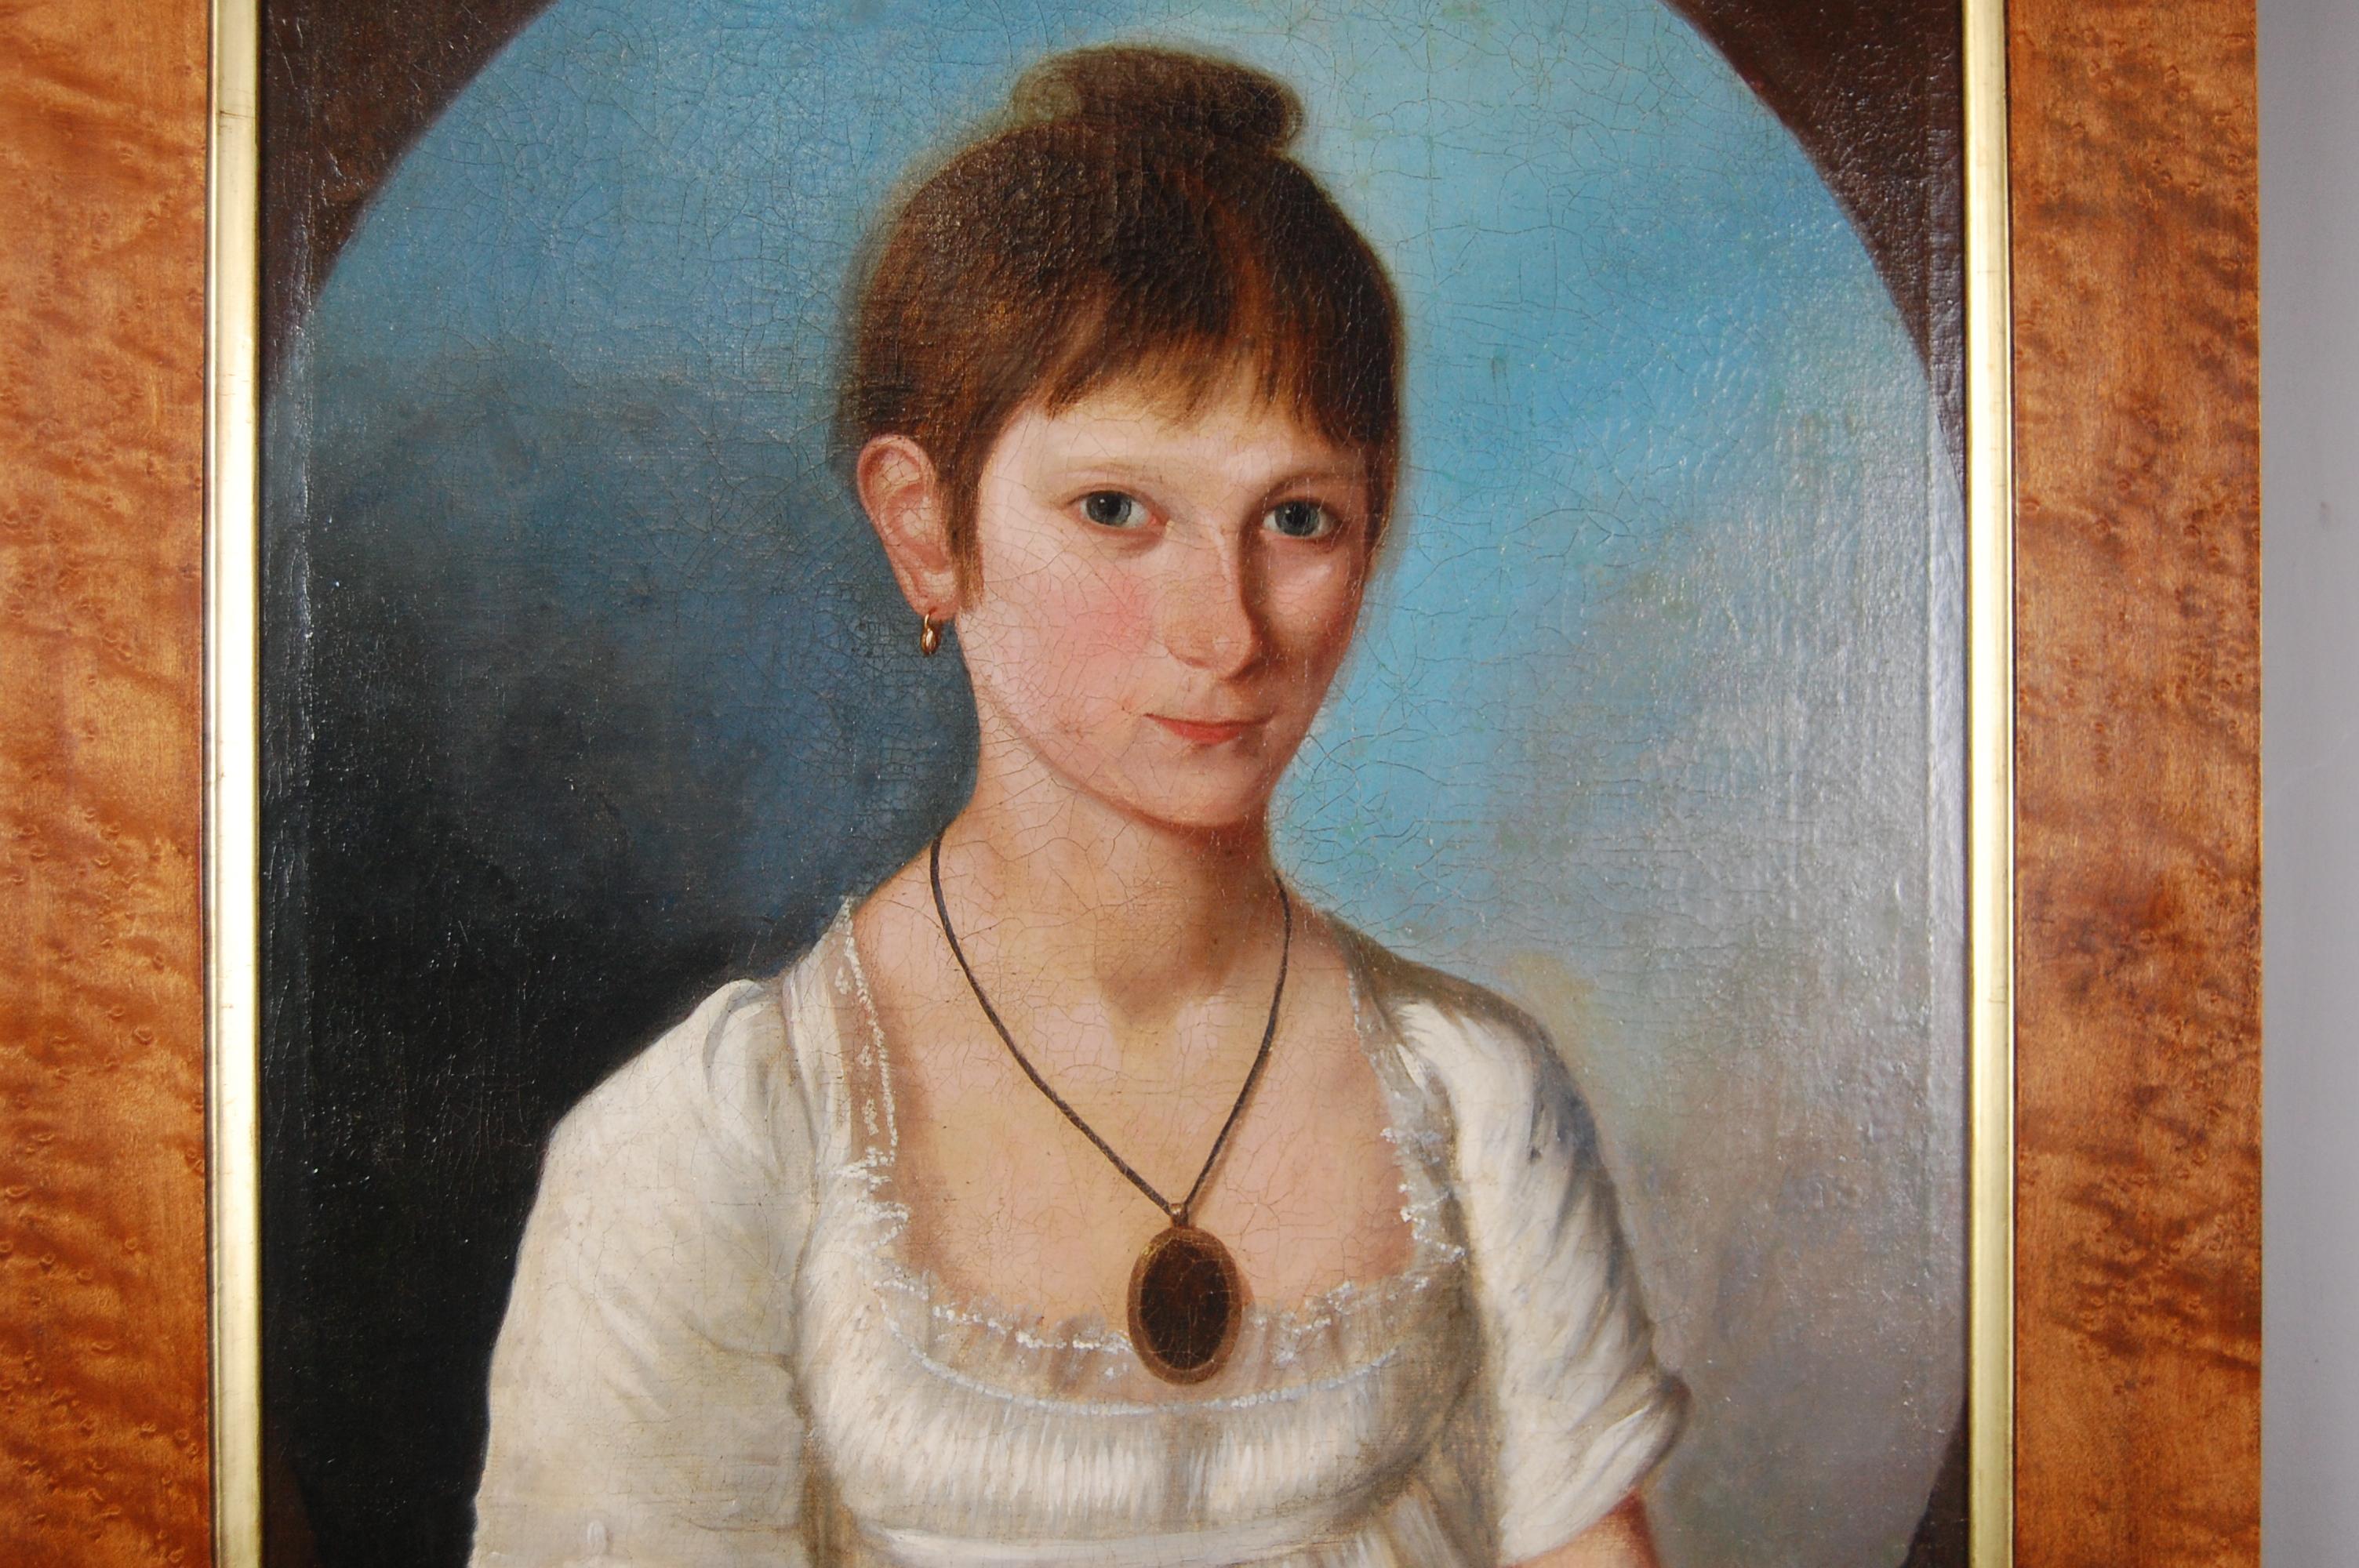 Painted Early 19th Century Oil on Canvas Portrait of Ann Dorr, Barrowby, near Grantham